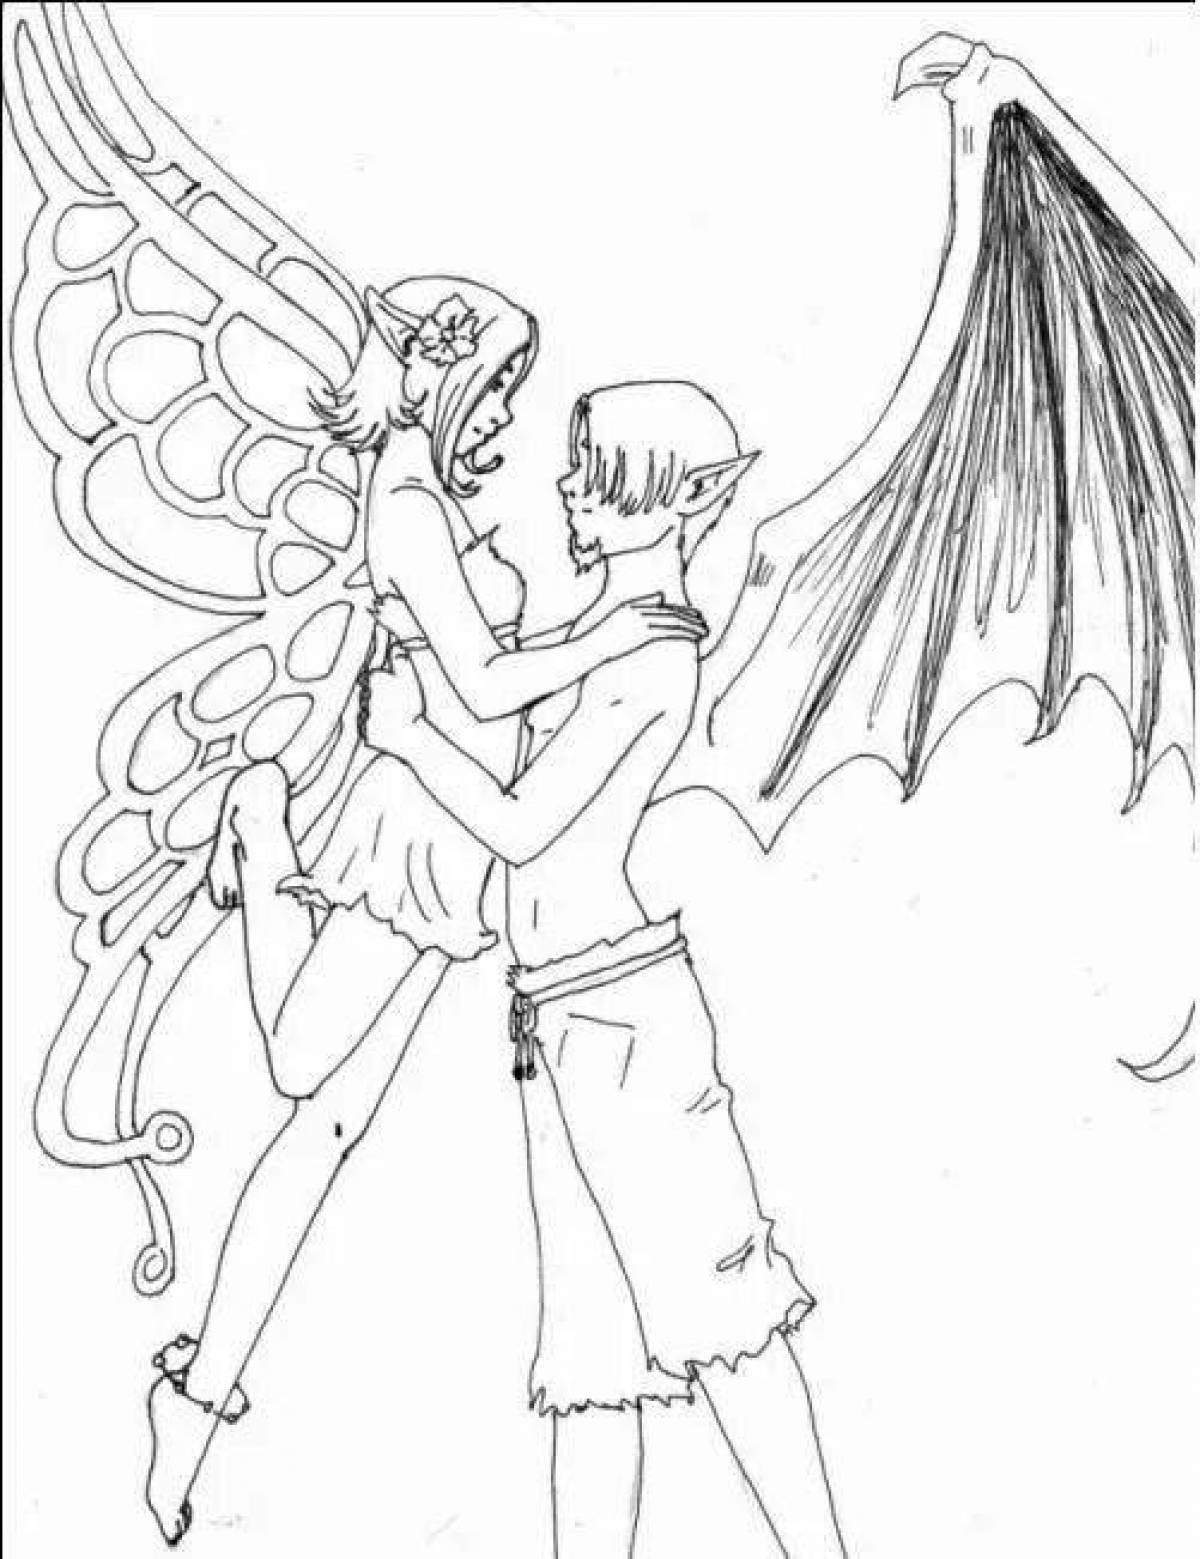 Exquisite demon and angel coloring book